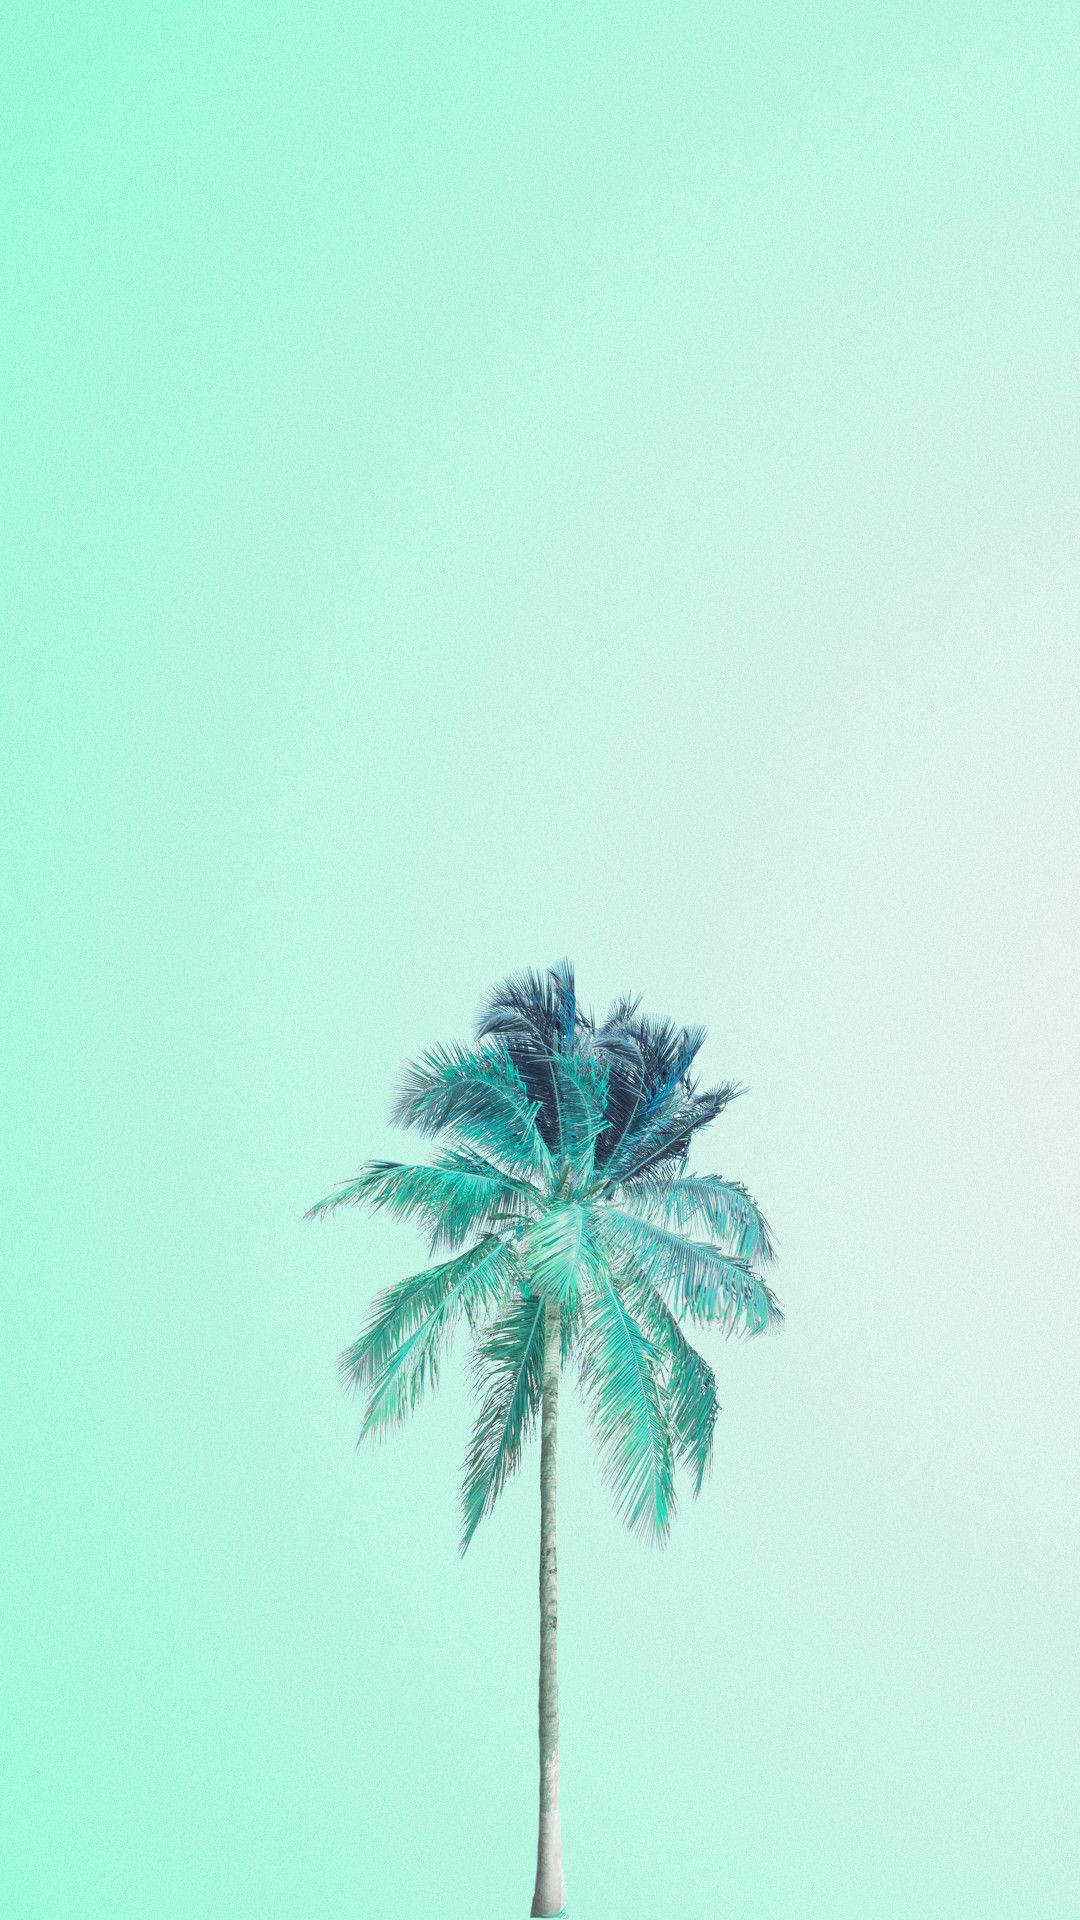 Coconut On Pastel Green Background Wallpaper